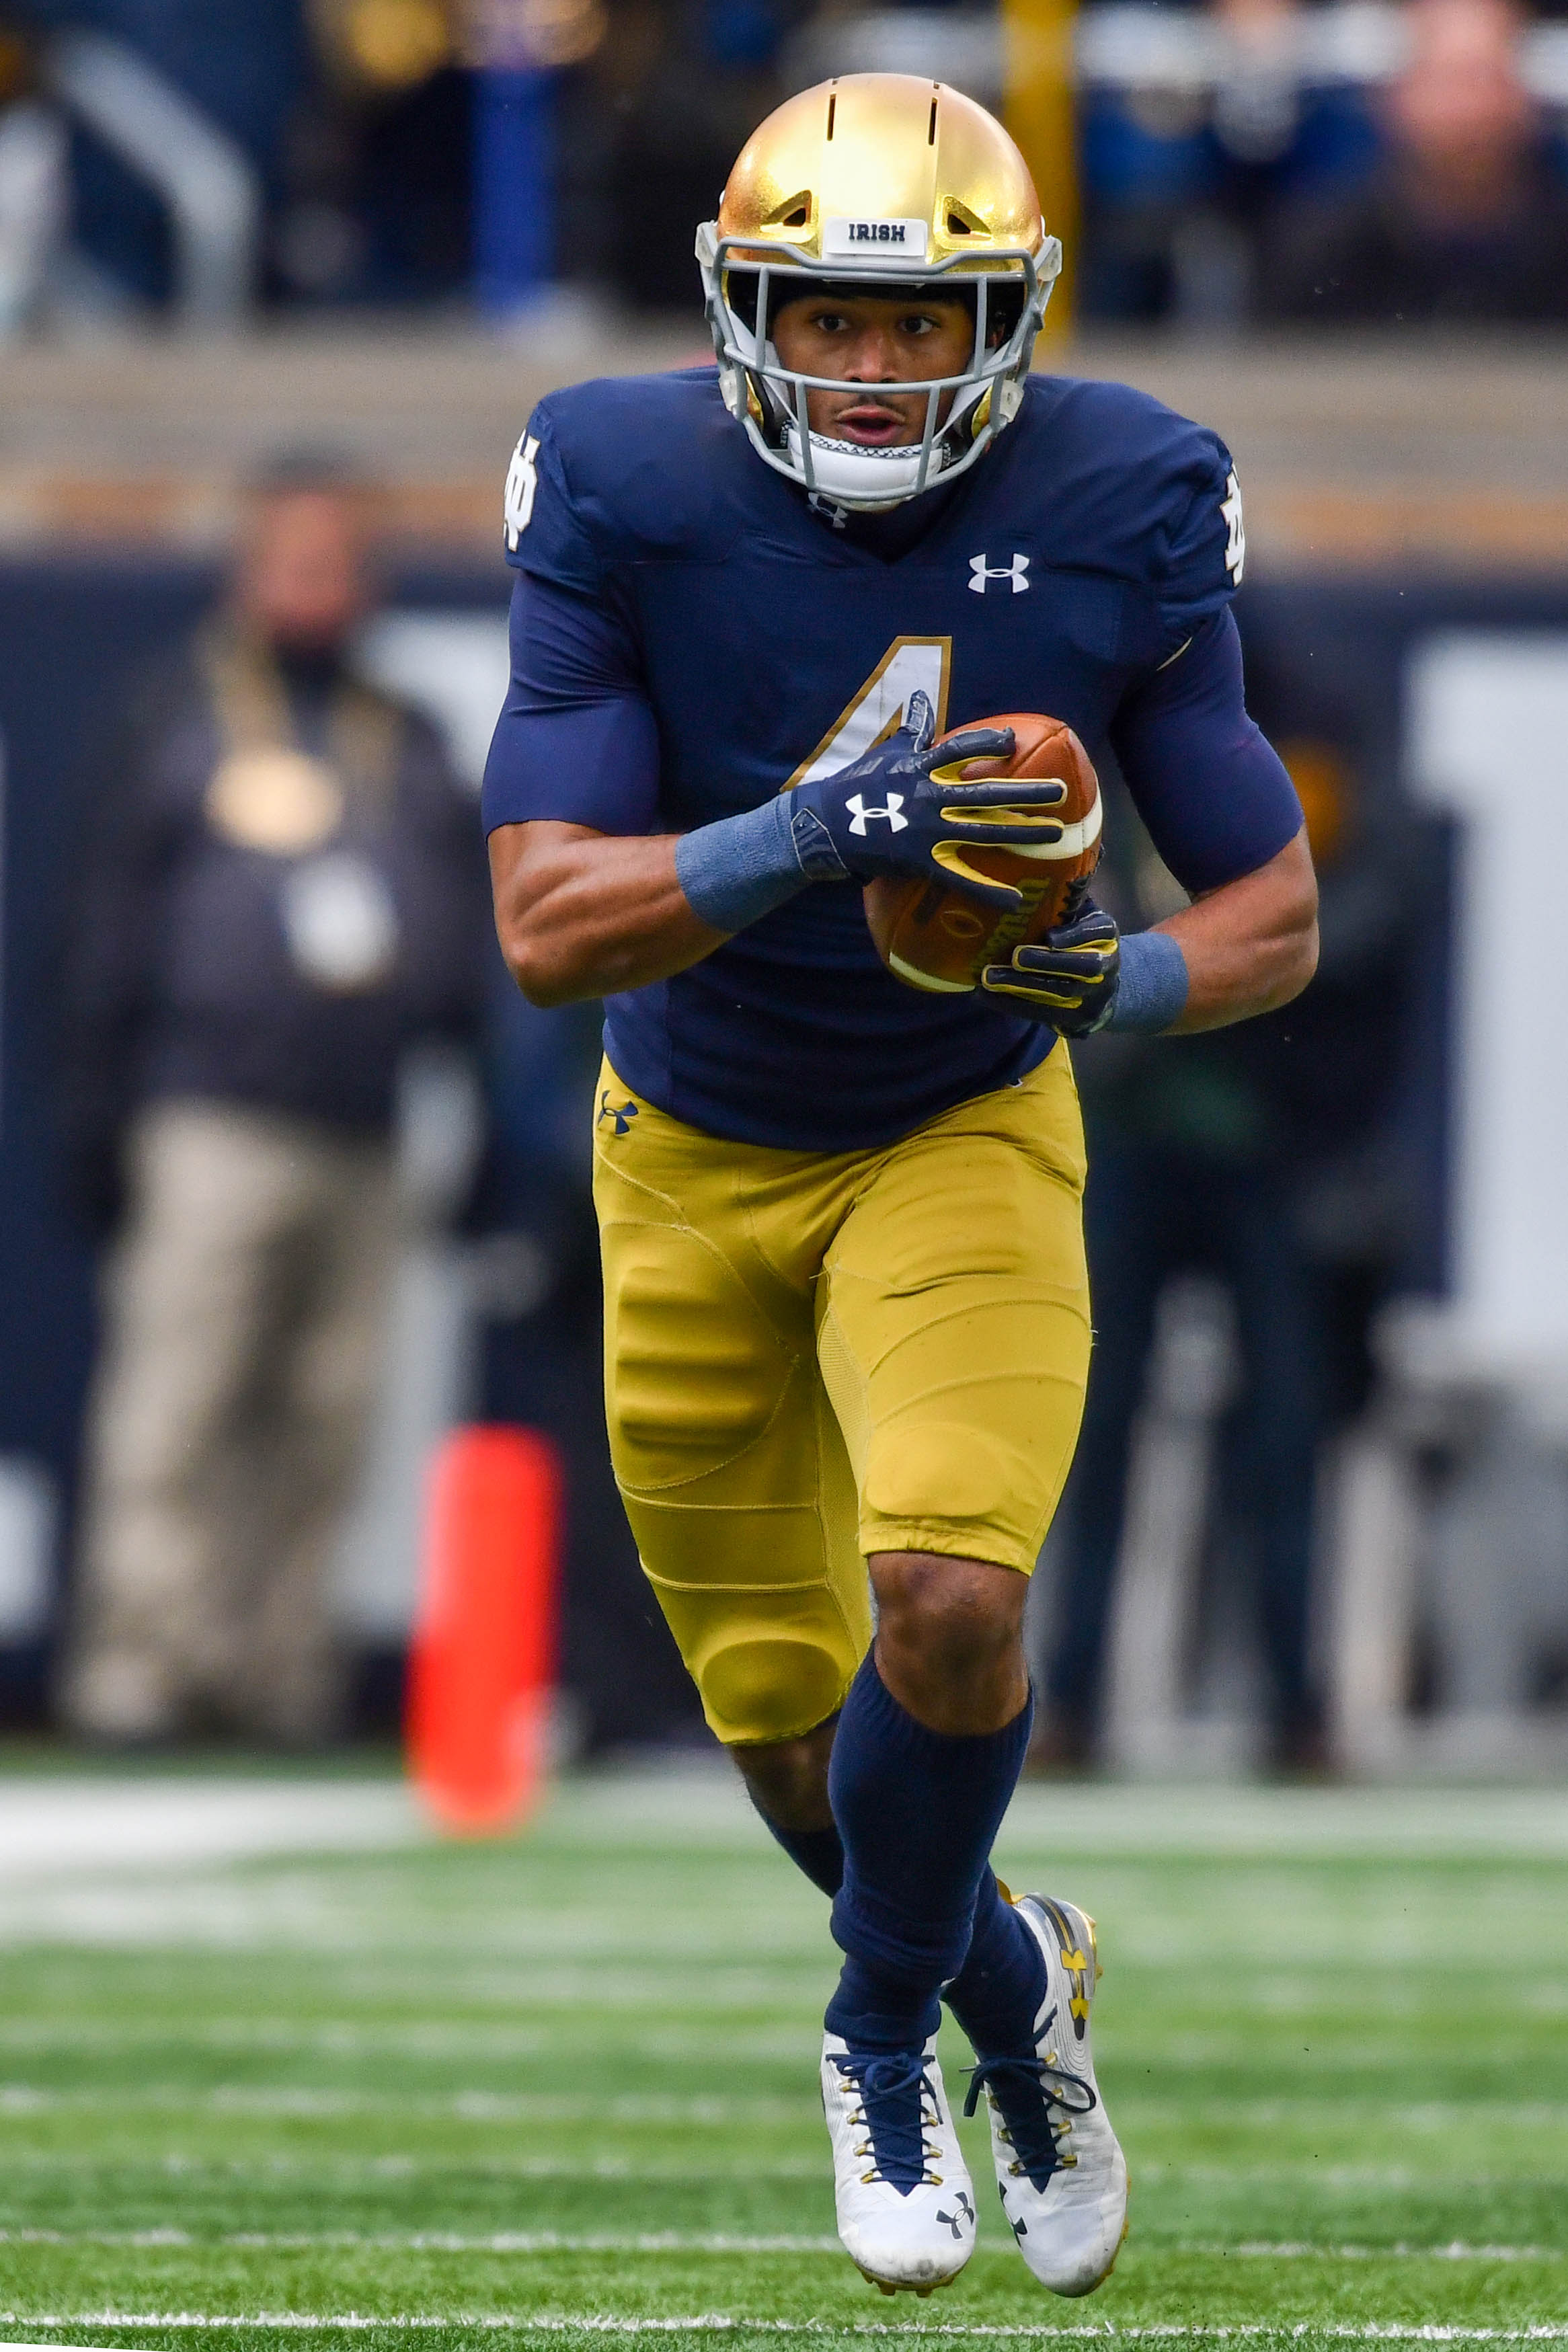 Notre Dame Player Preview: Avery Davis – RB/WR